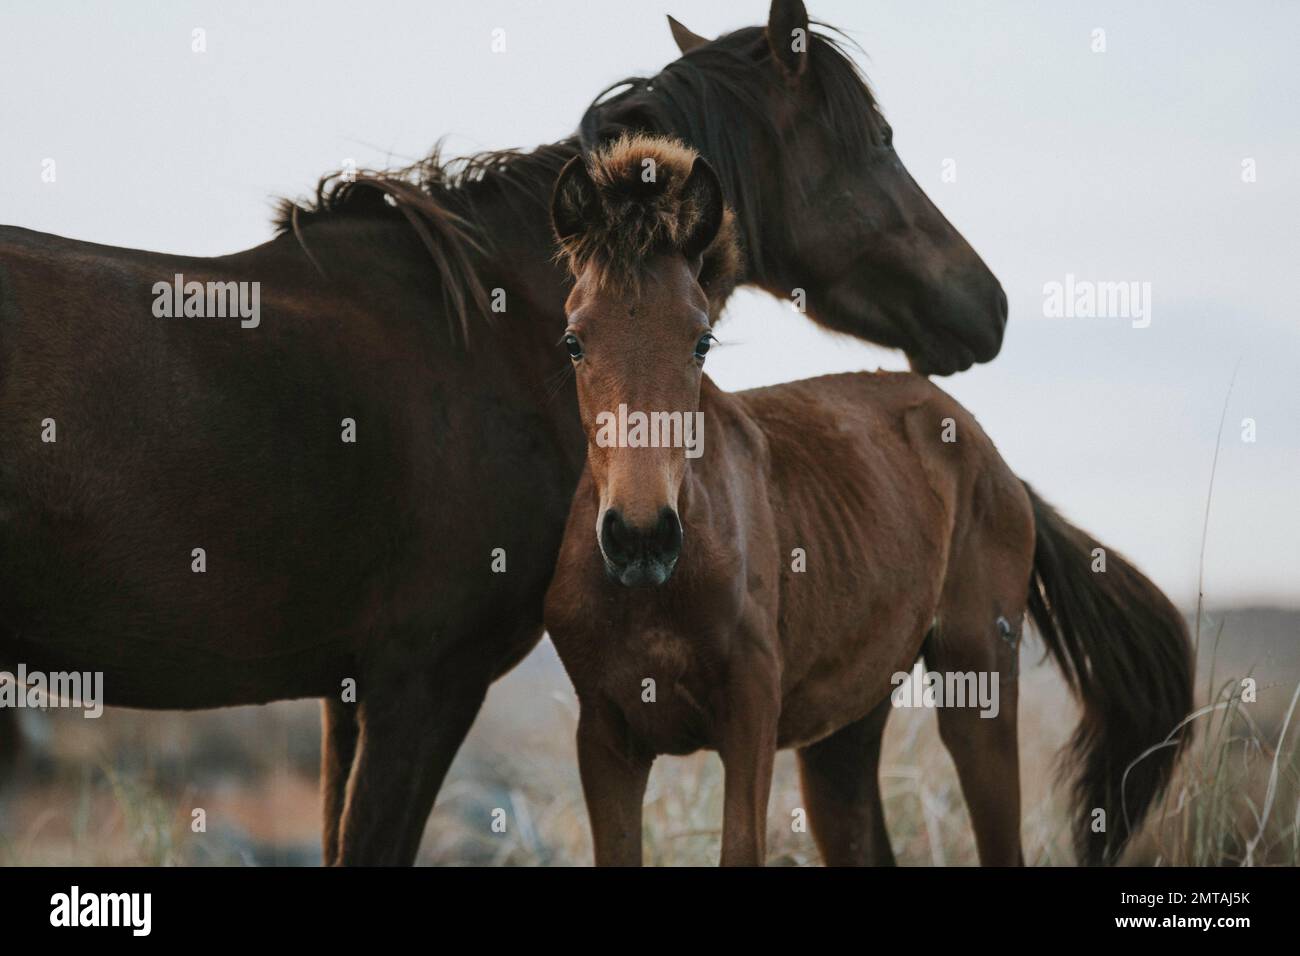 A horse staring at the camera underneath a bigger horse in Sumba, East Nusa Tenggara, Indonesia Stock Photo